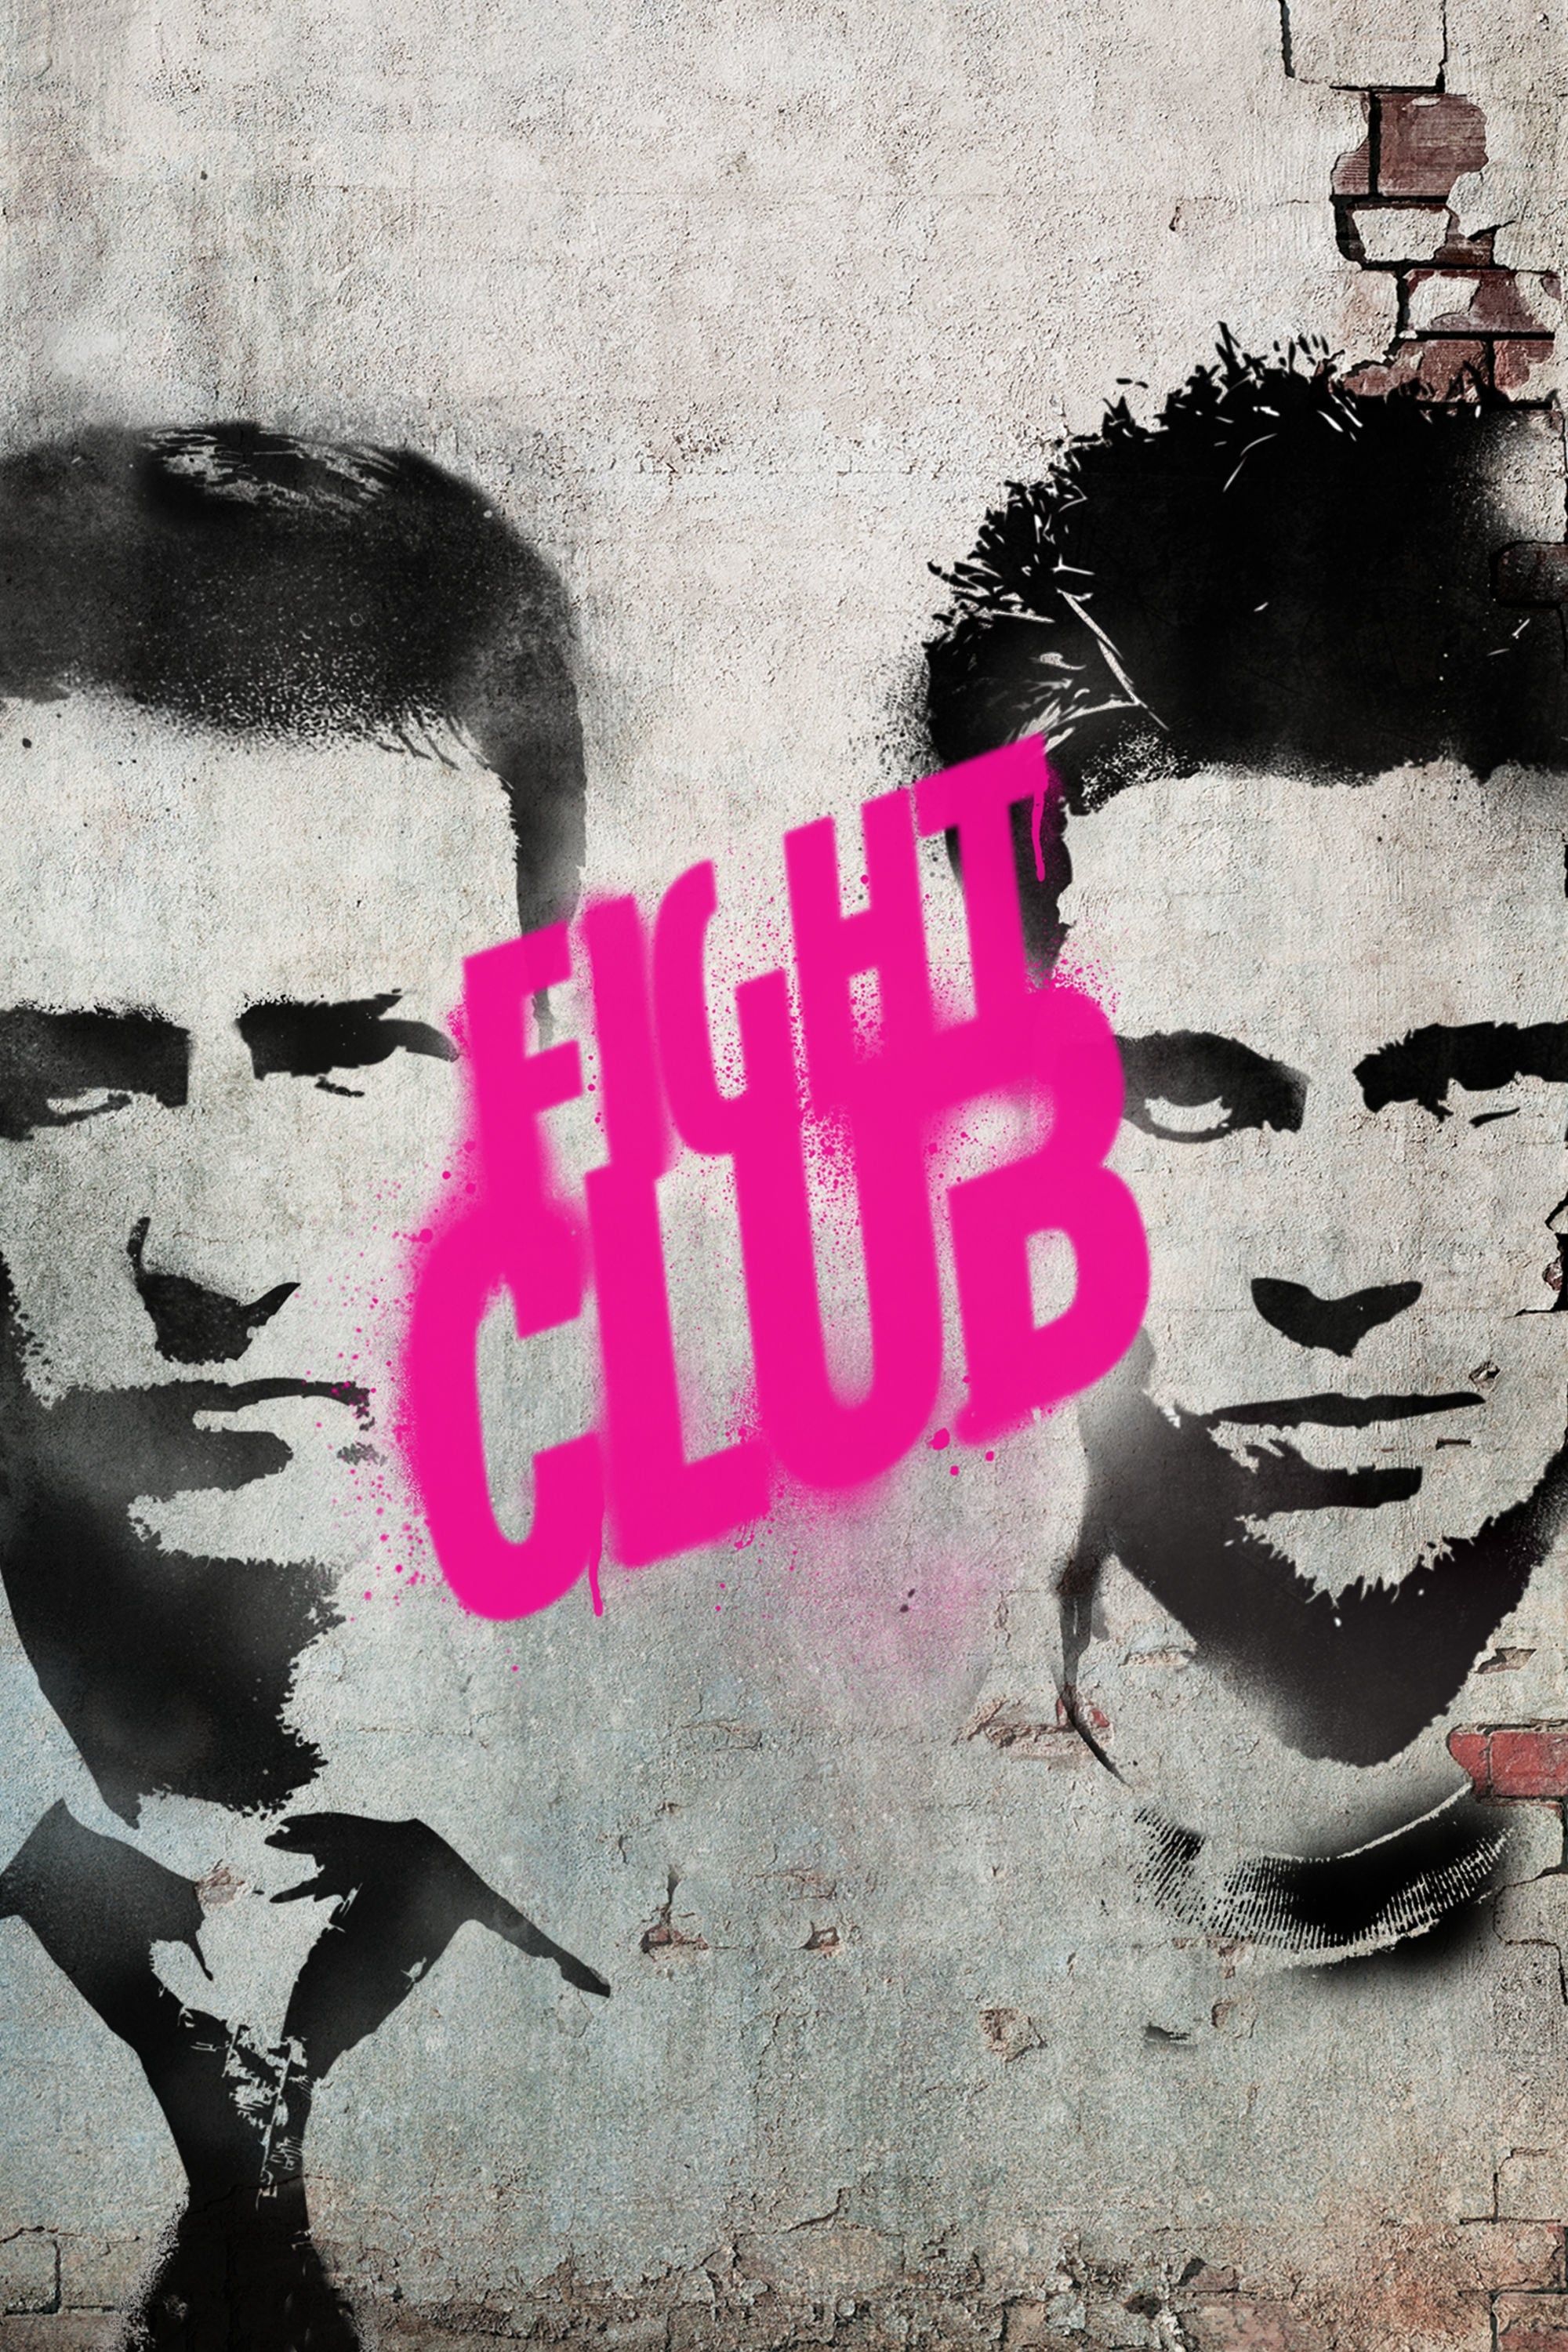 Original Fight Club ending restored in China after backlash, China